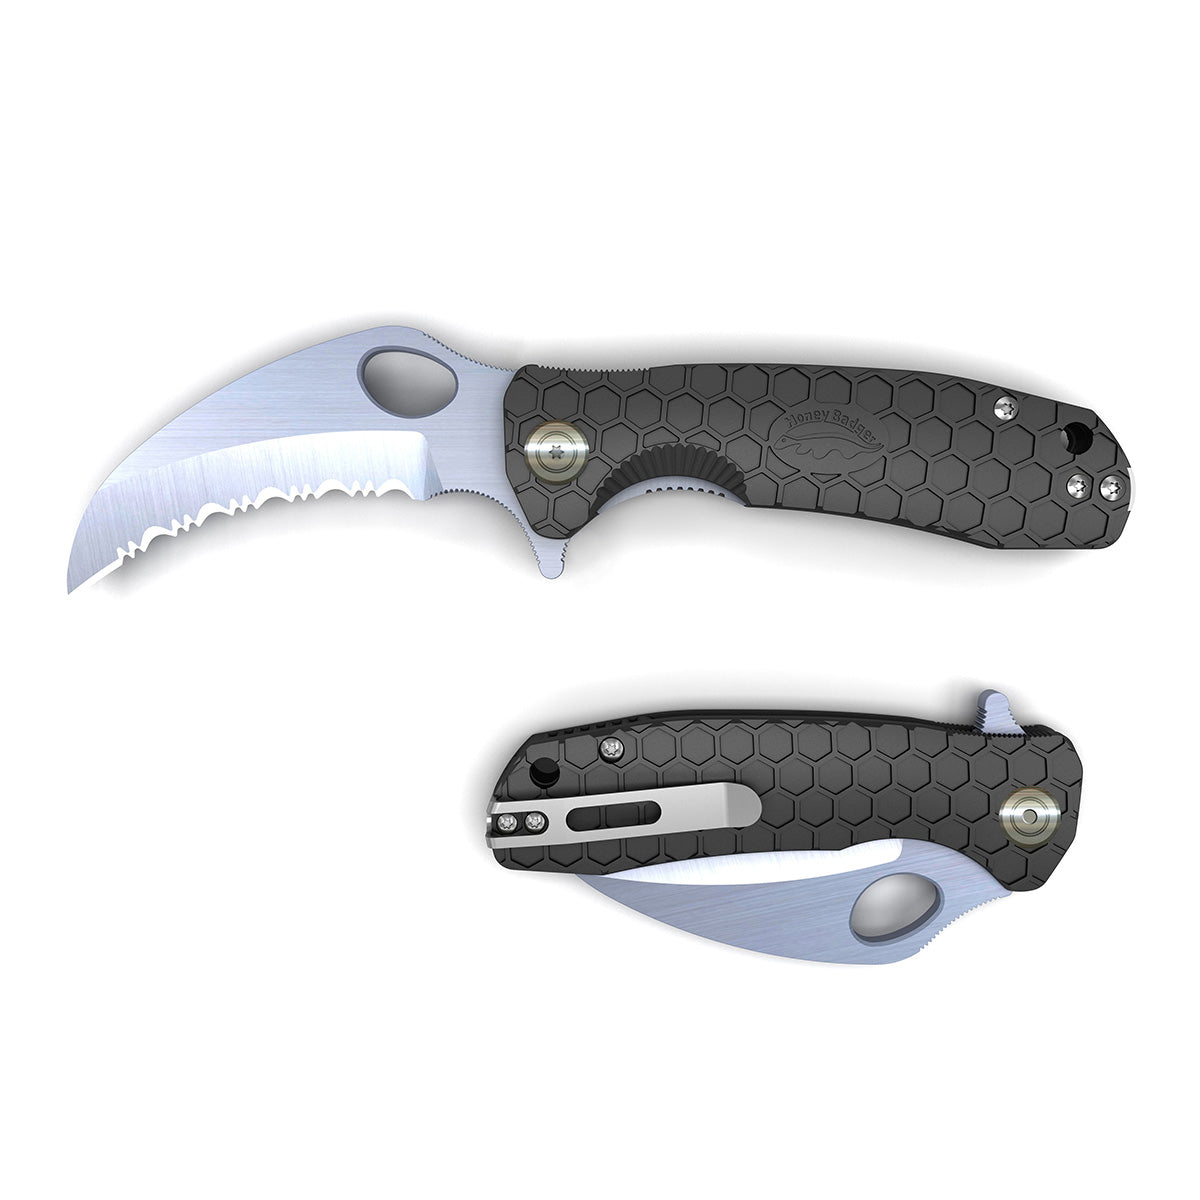 Honey Badger Claw Serrated Knife